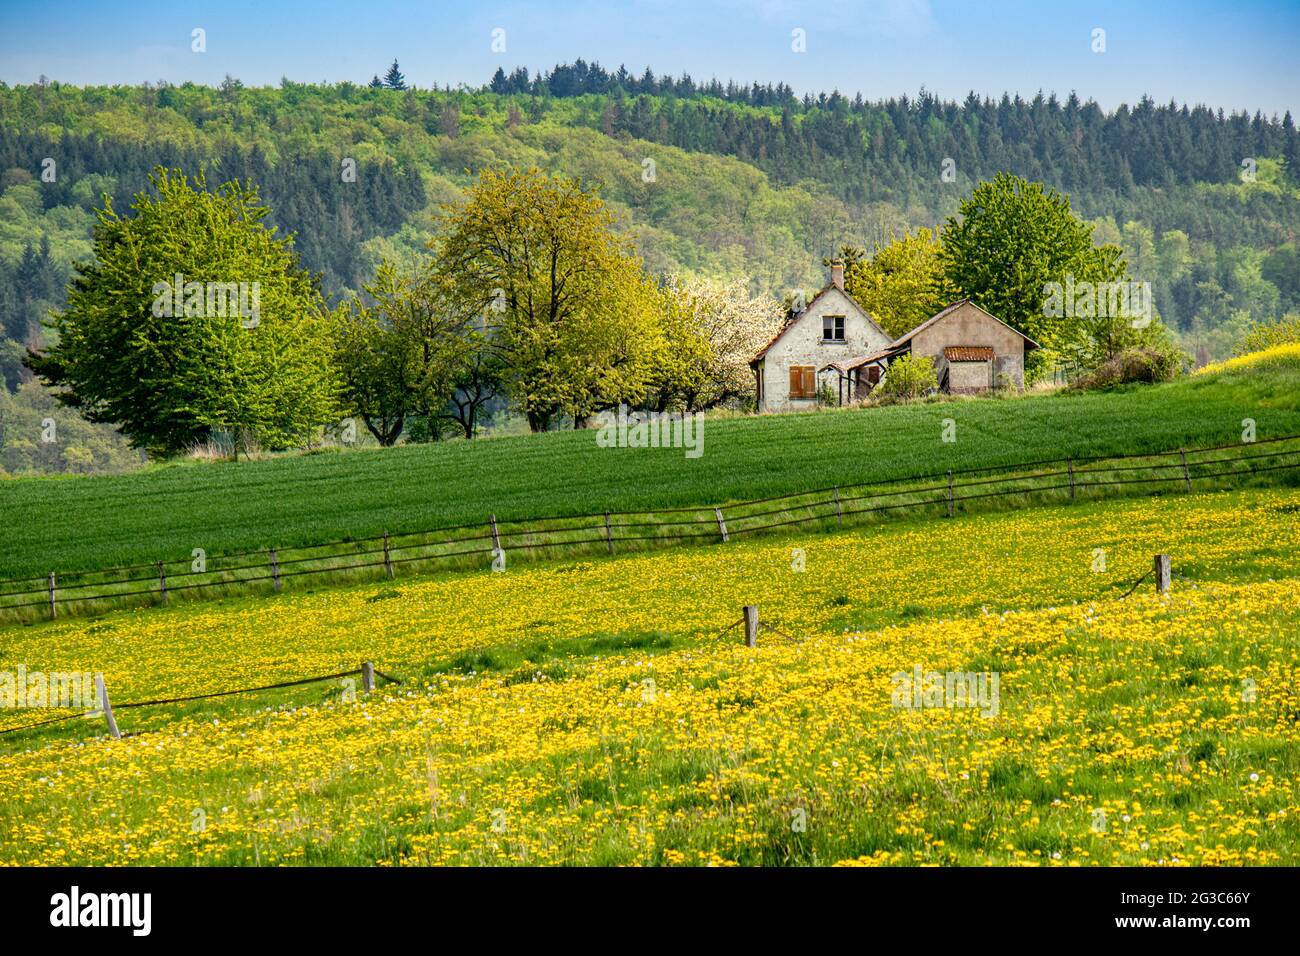 Blooming pasture with dandelions on a hillside in Taunus mountains region nearby town Usingen, Hesse, Germany Stock Photo